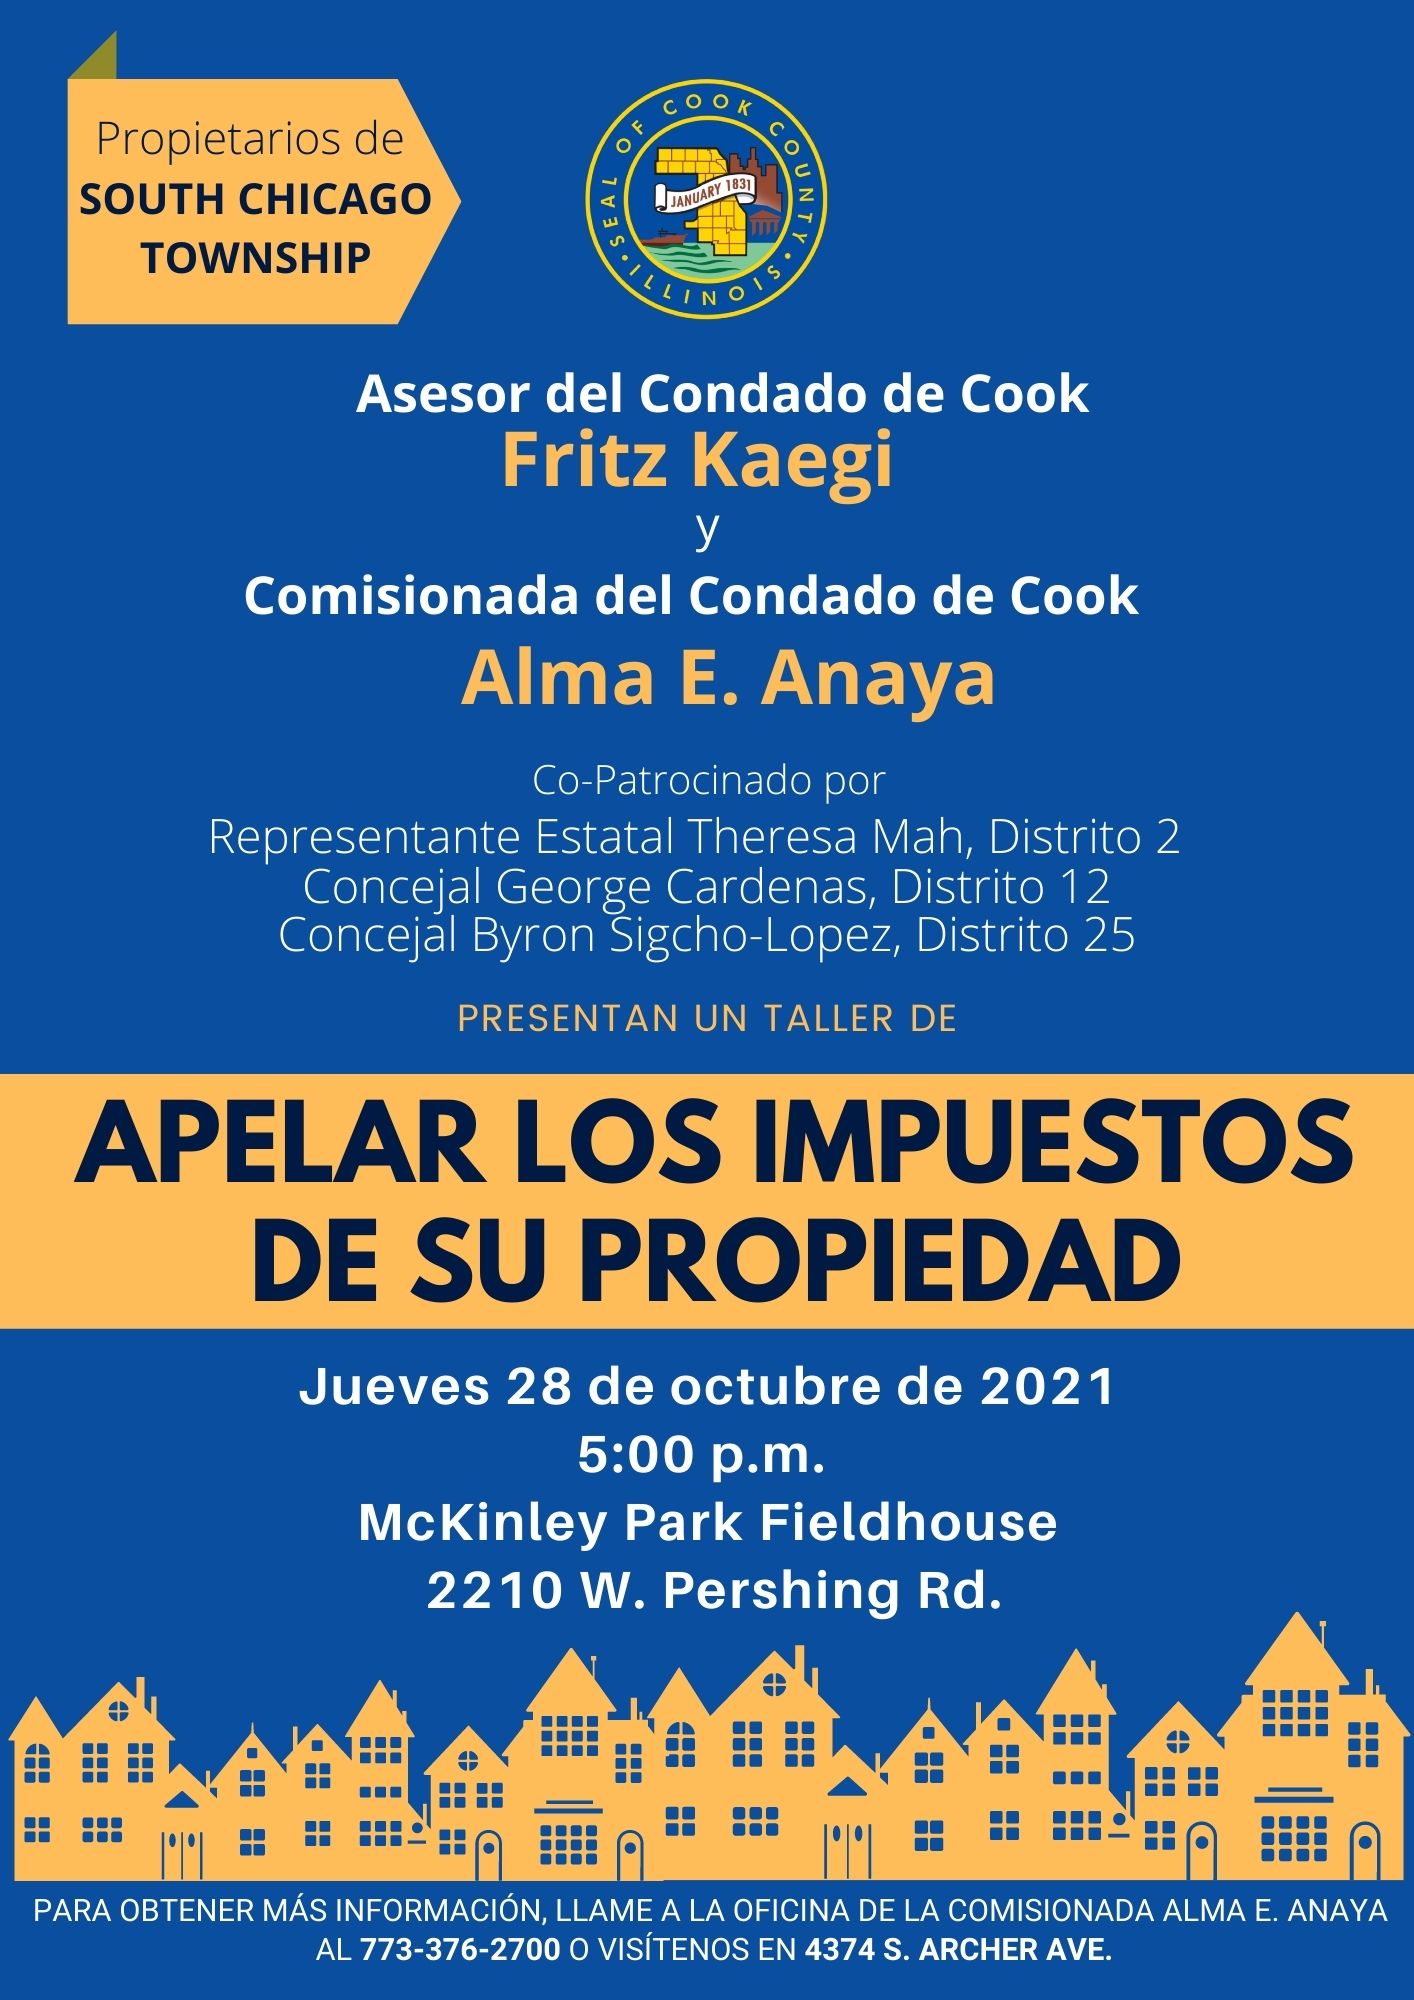 Invite to South Chicago Township Event October 28, 2021 in Spanish